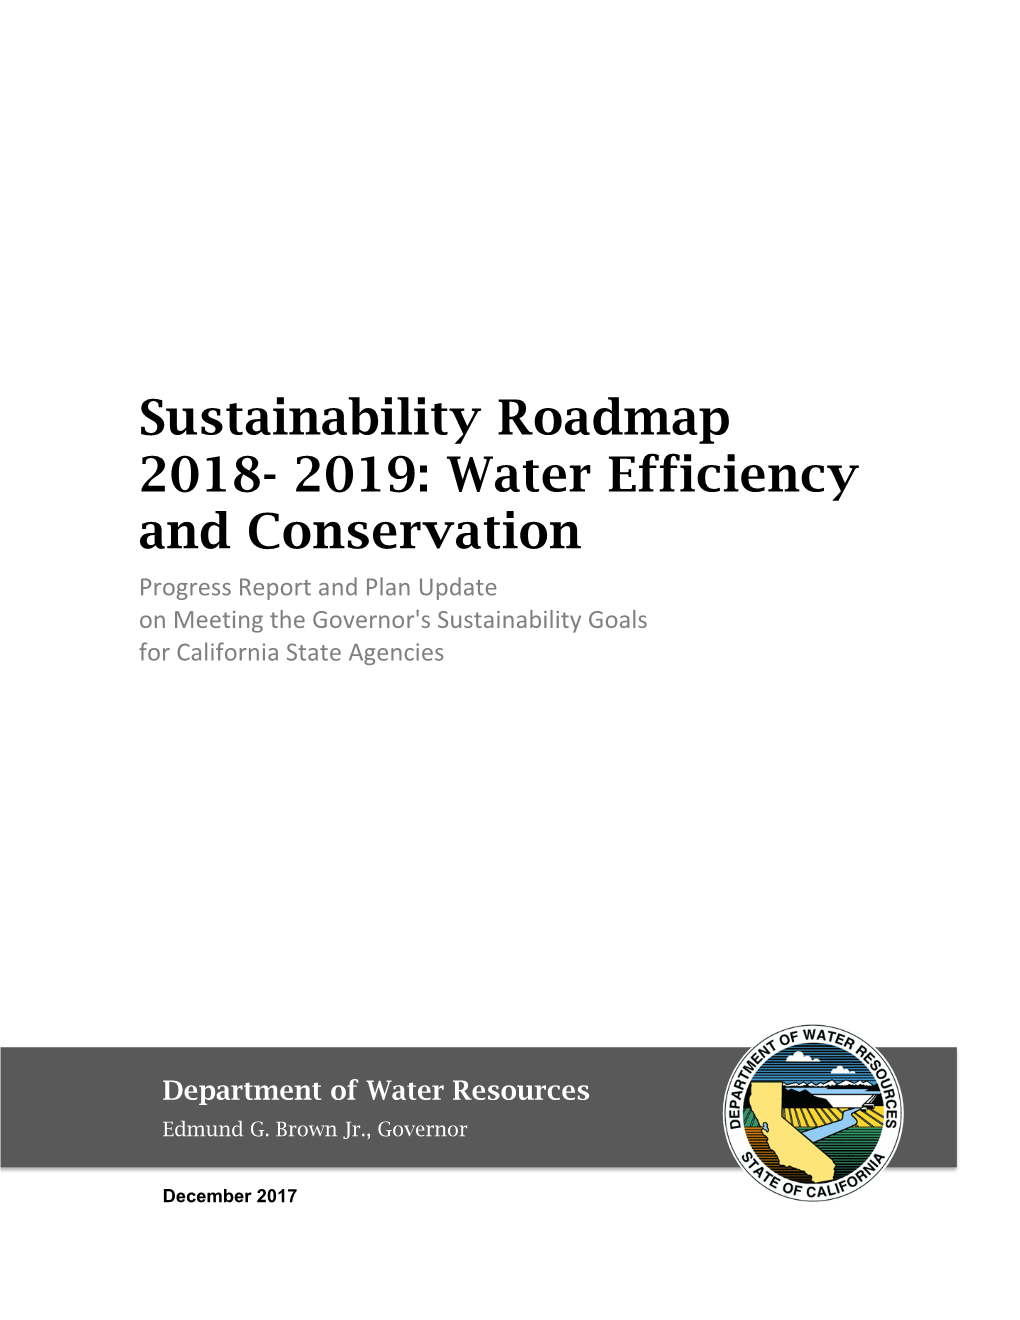 Sustainability Roadmap 2018- 2019: Water Efficiency and Conservation